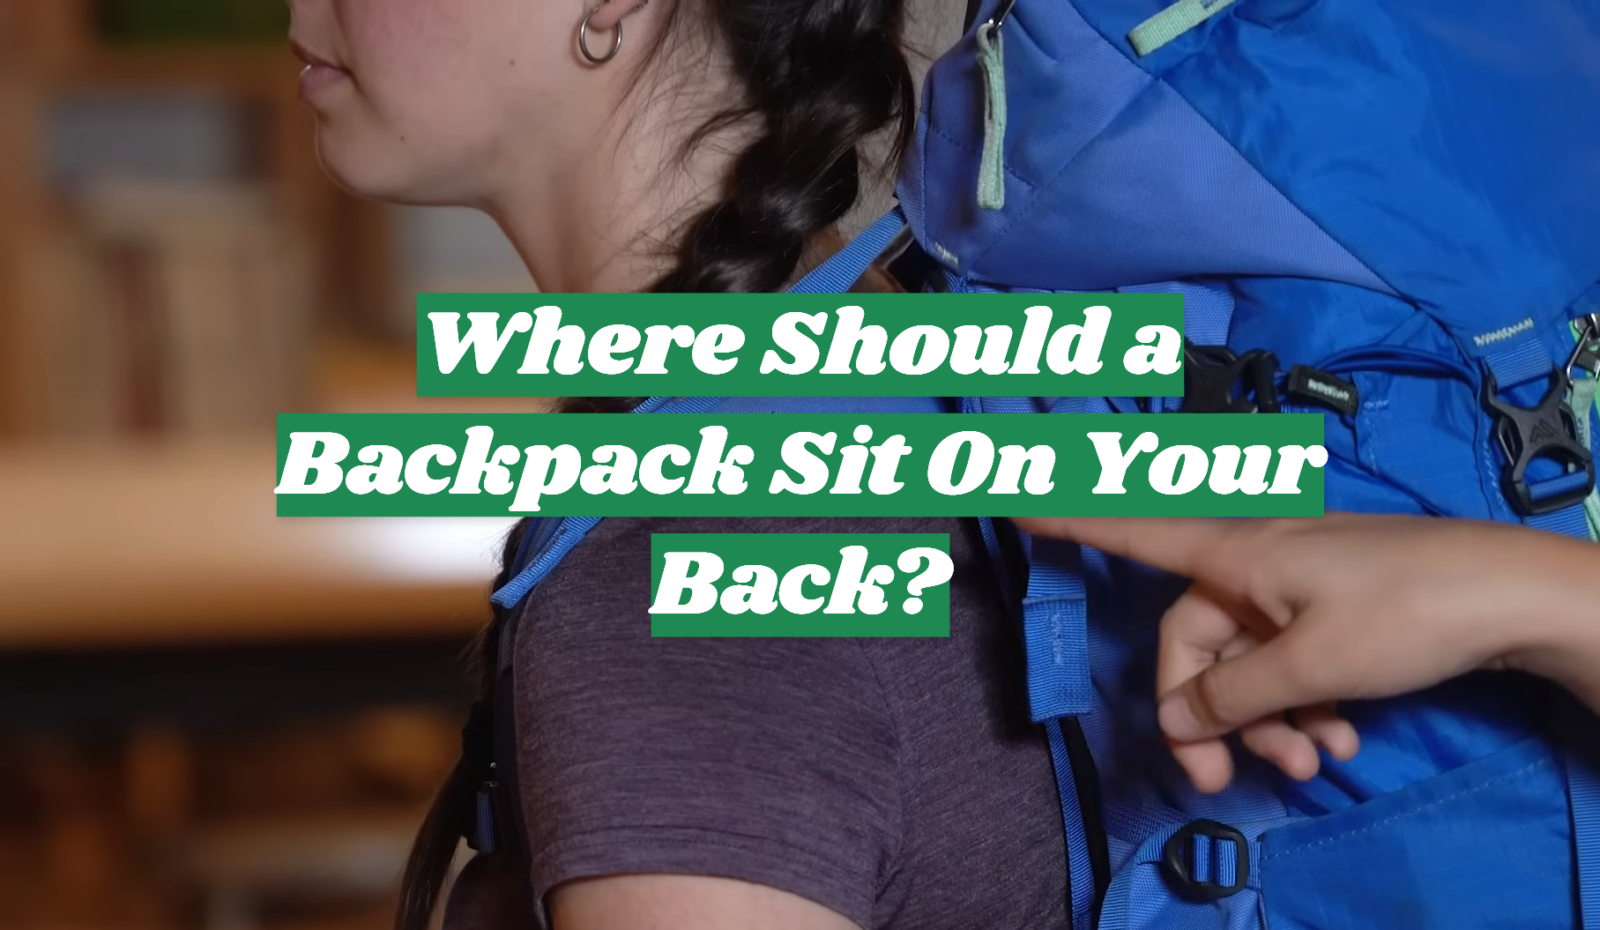 Where Should a Backpack Sit On Your Back?